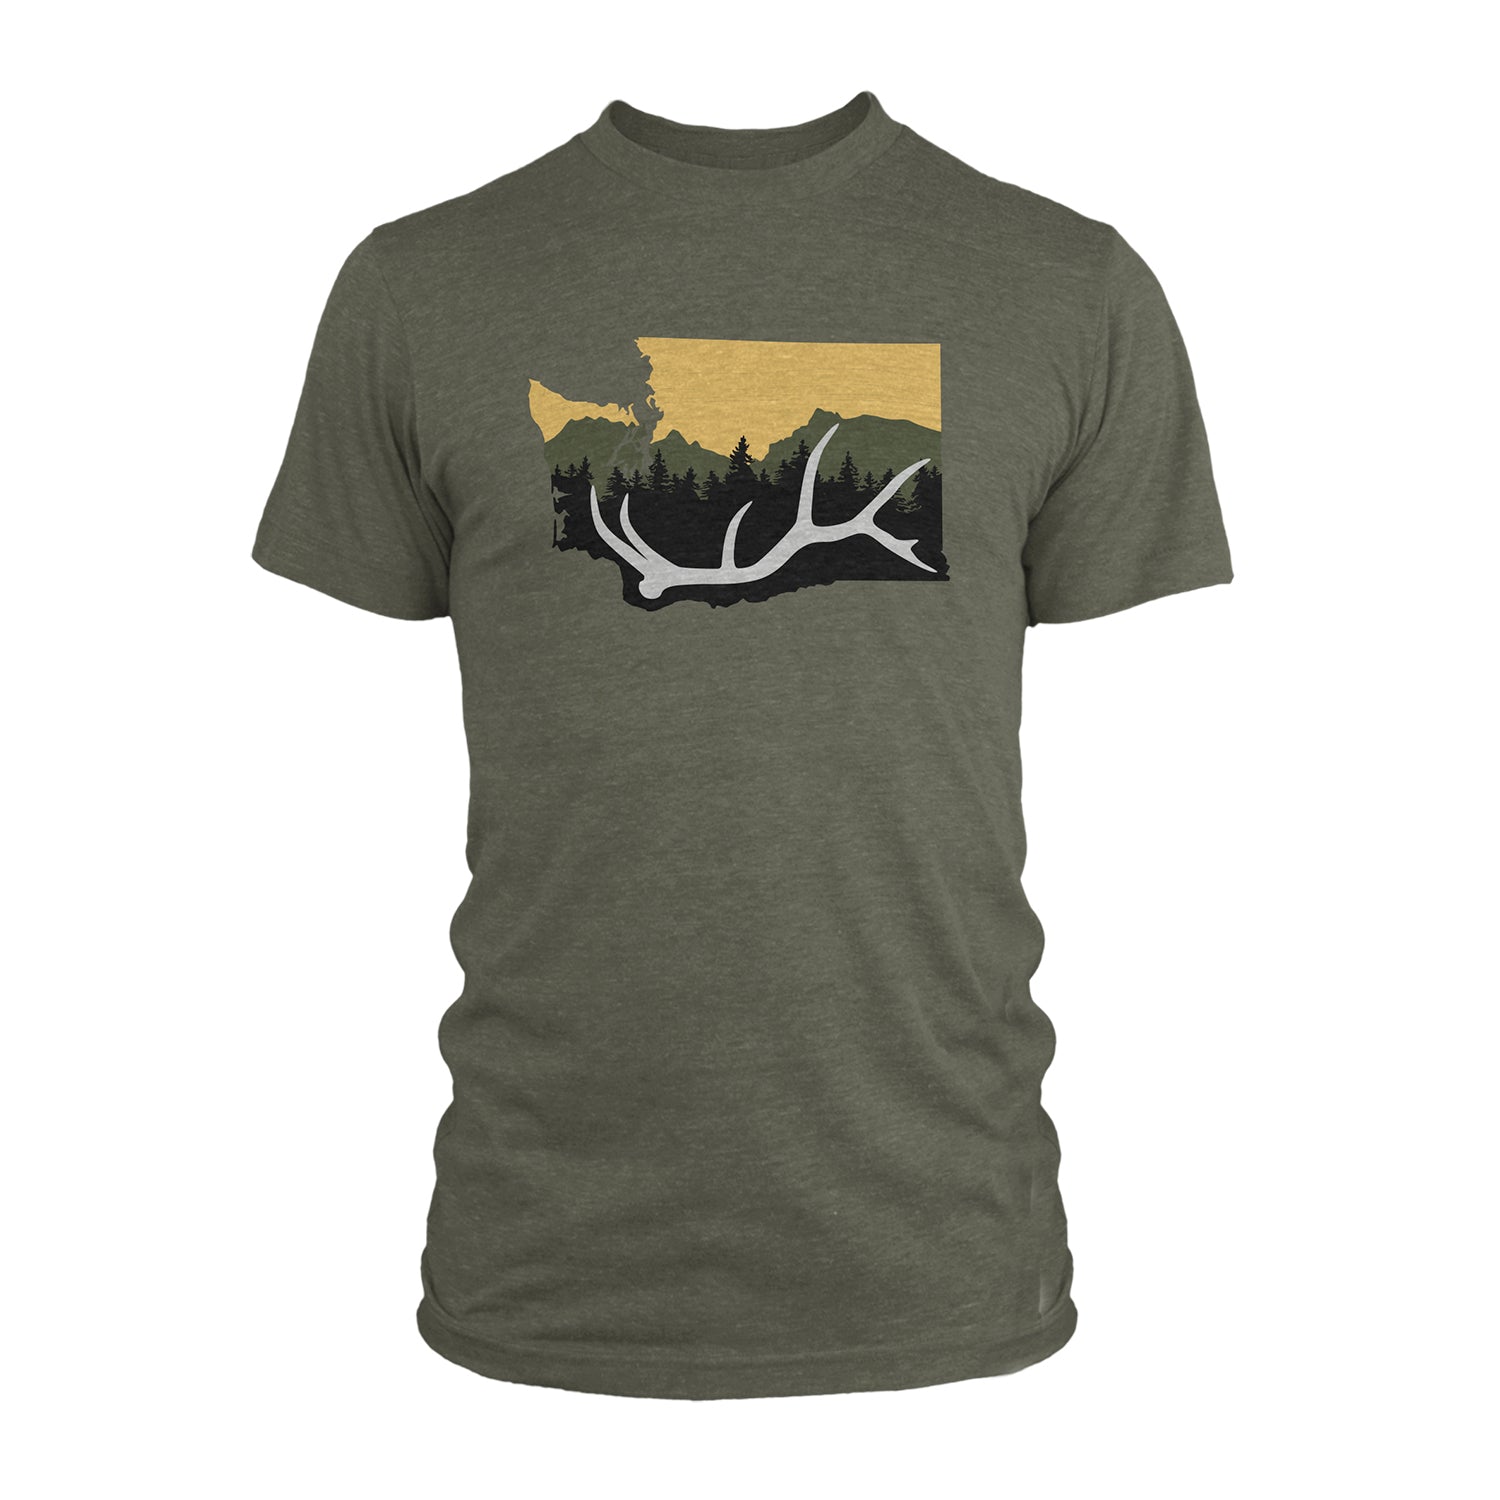 A green short sleeved tee shirt has a chest design in the shape of washington state with an elk antler in front of pine trees and mountains